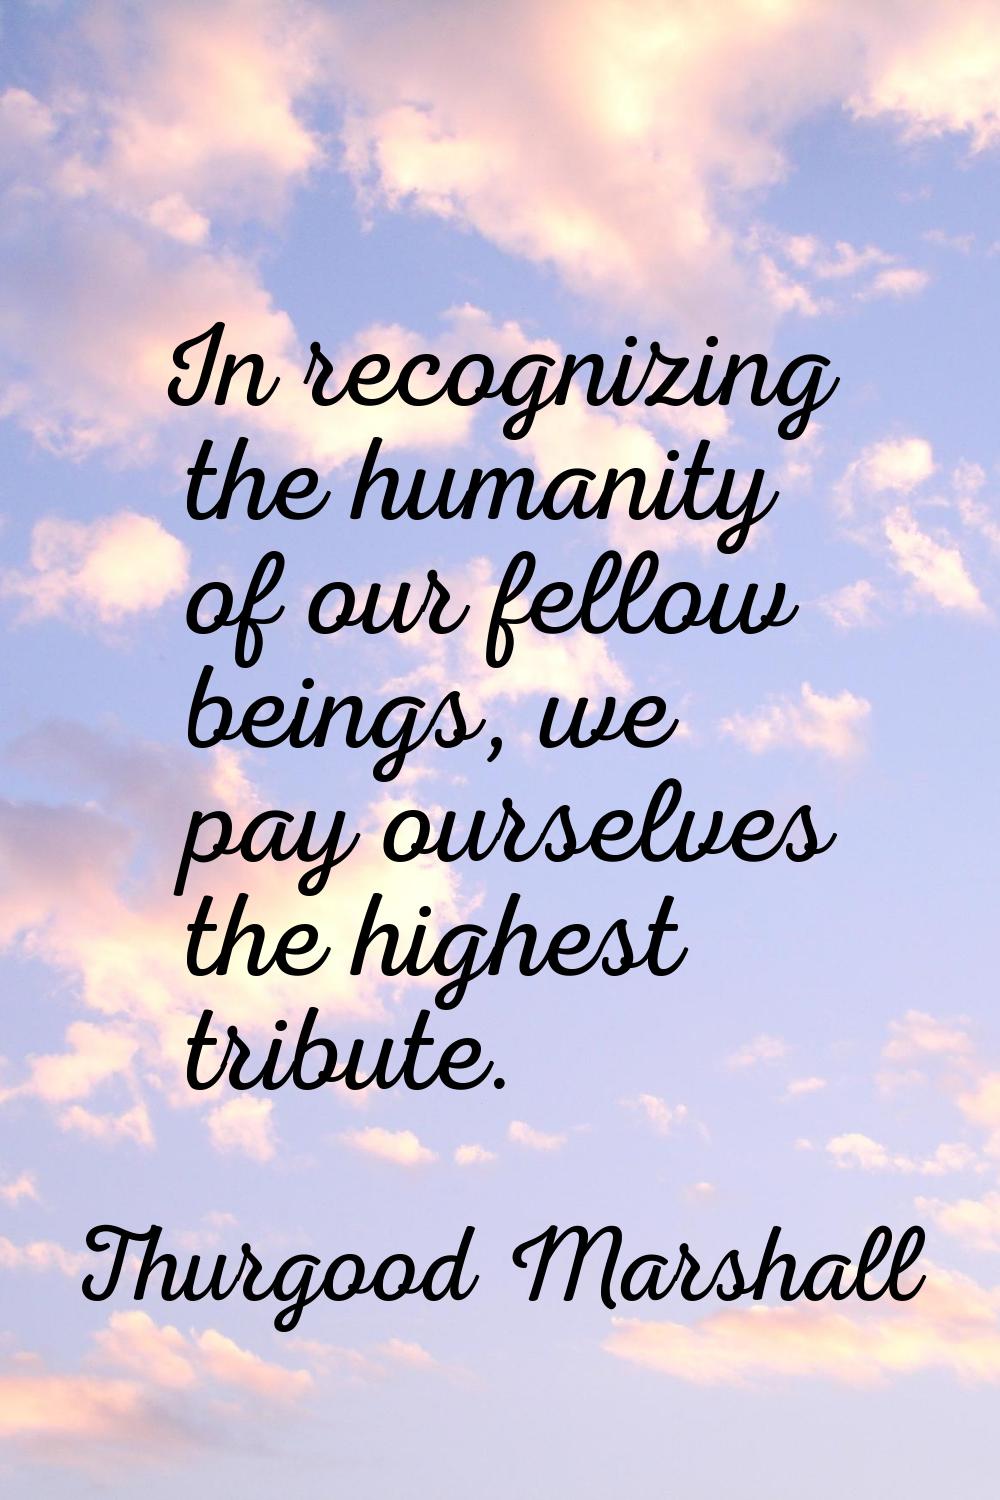 In recognizing the humanity of our fellow beings, we pay ourselves the highest tribute.